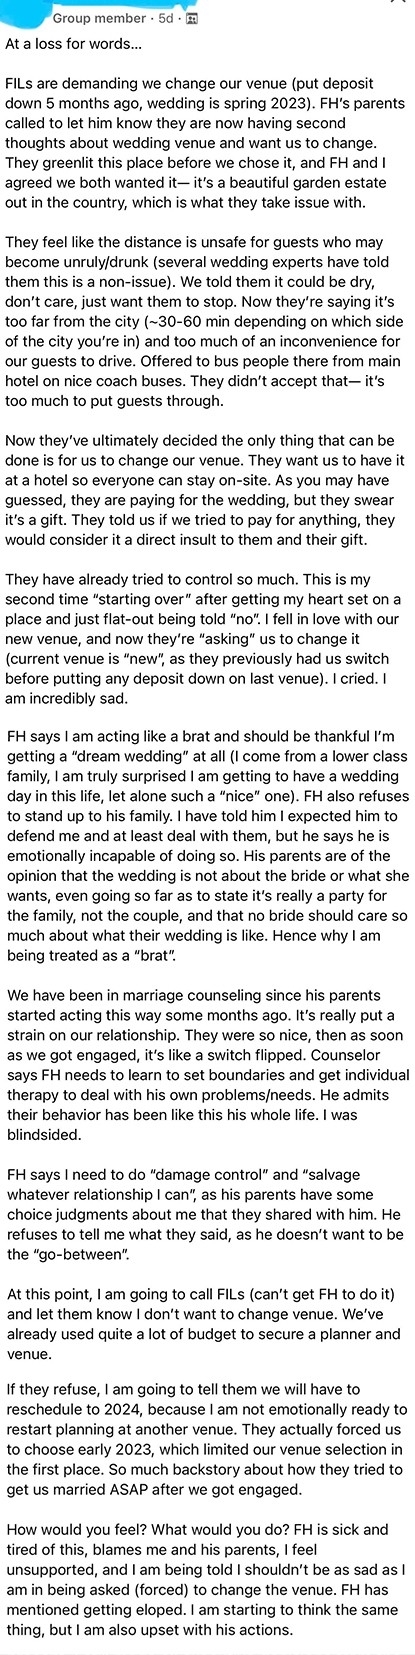 The image contains a long text message expressing someone&#x27;s distress over their wedding venue&#x27;s policies during a personal health crisis